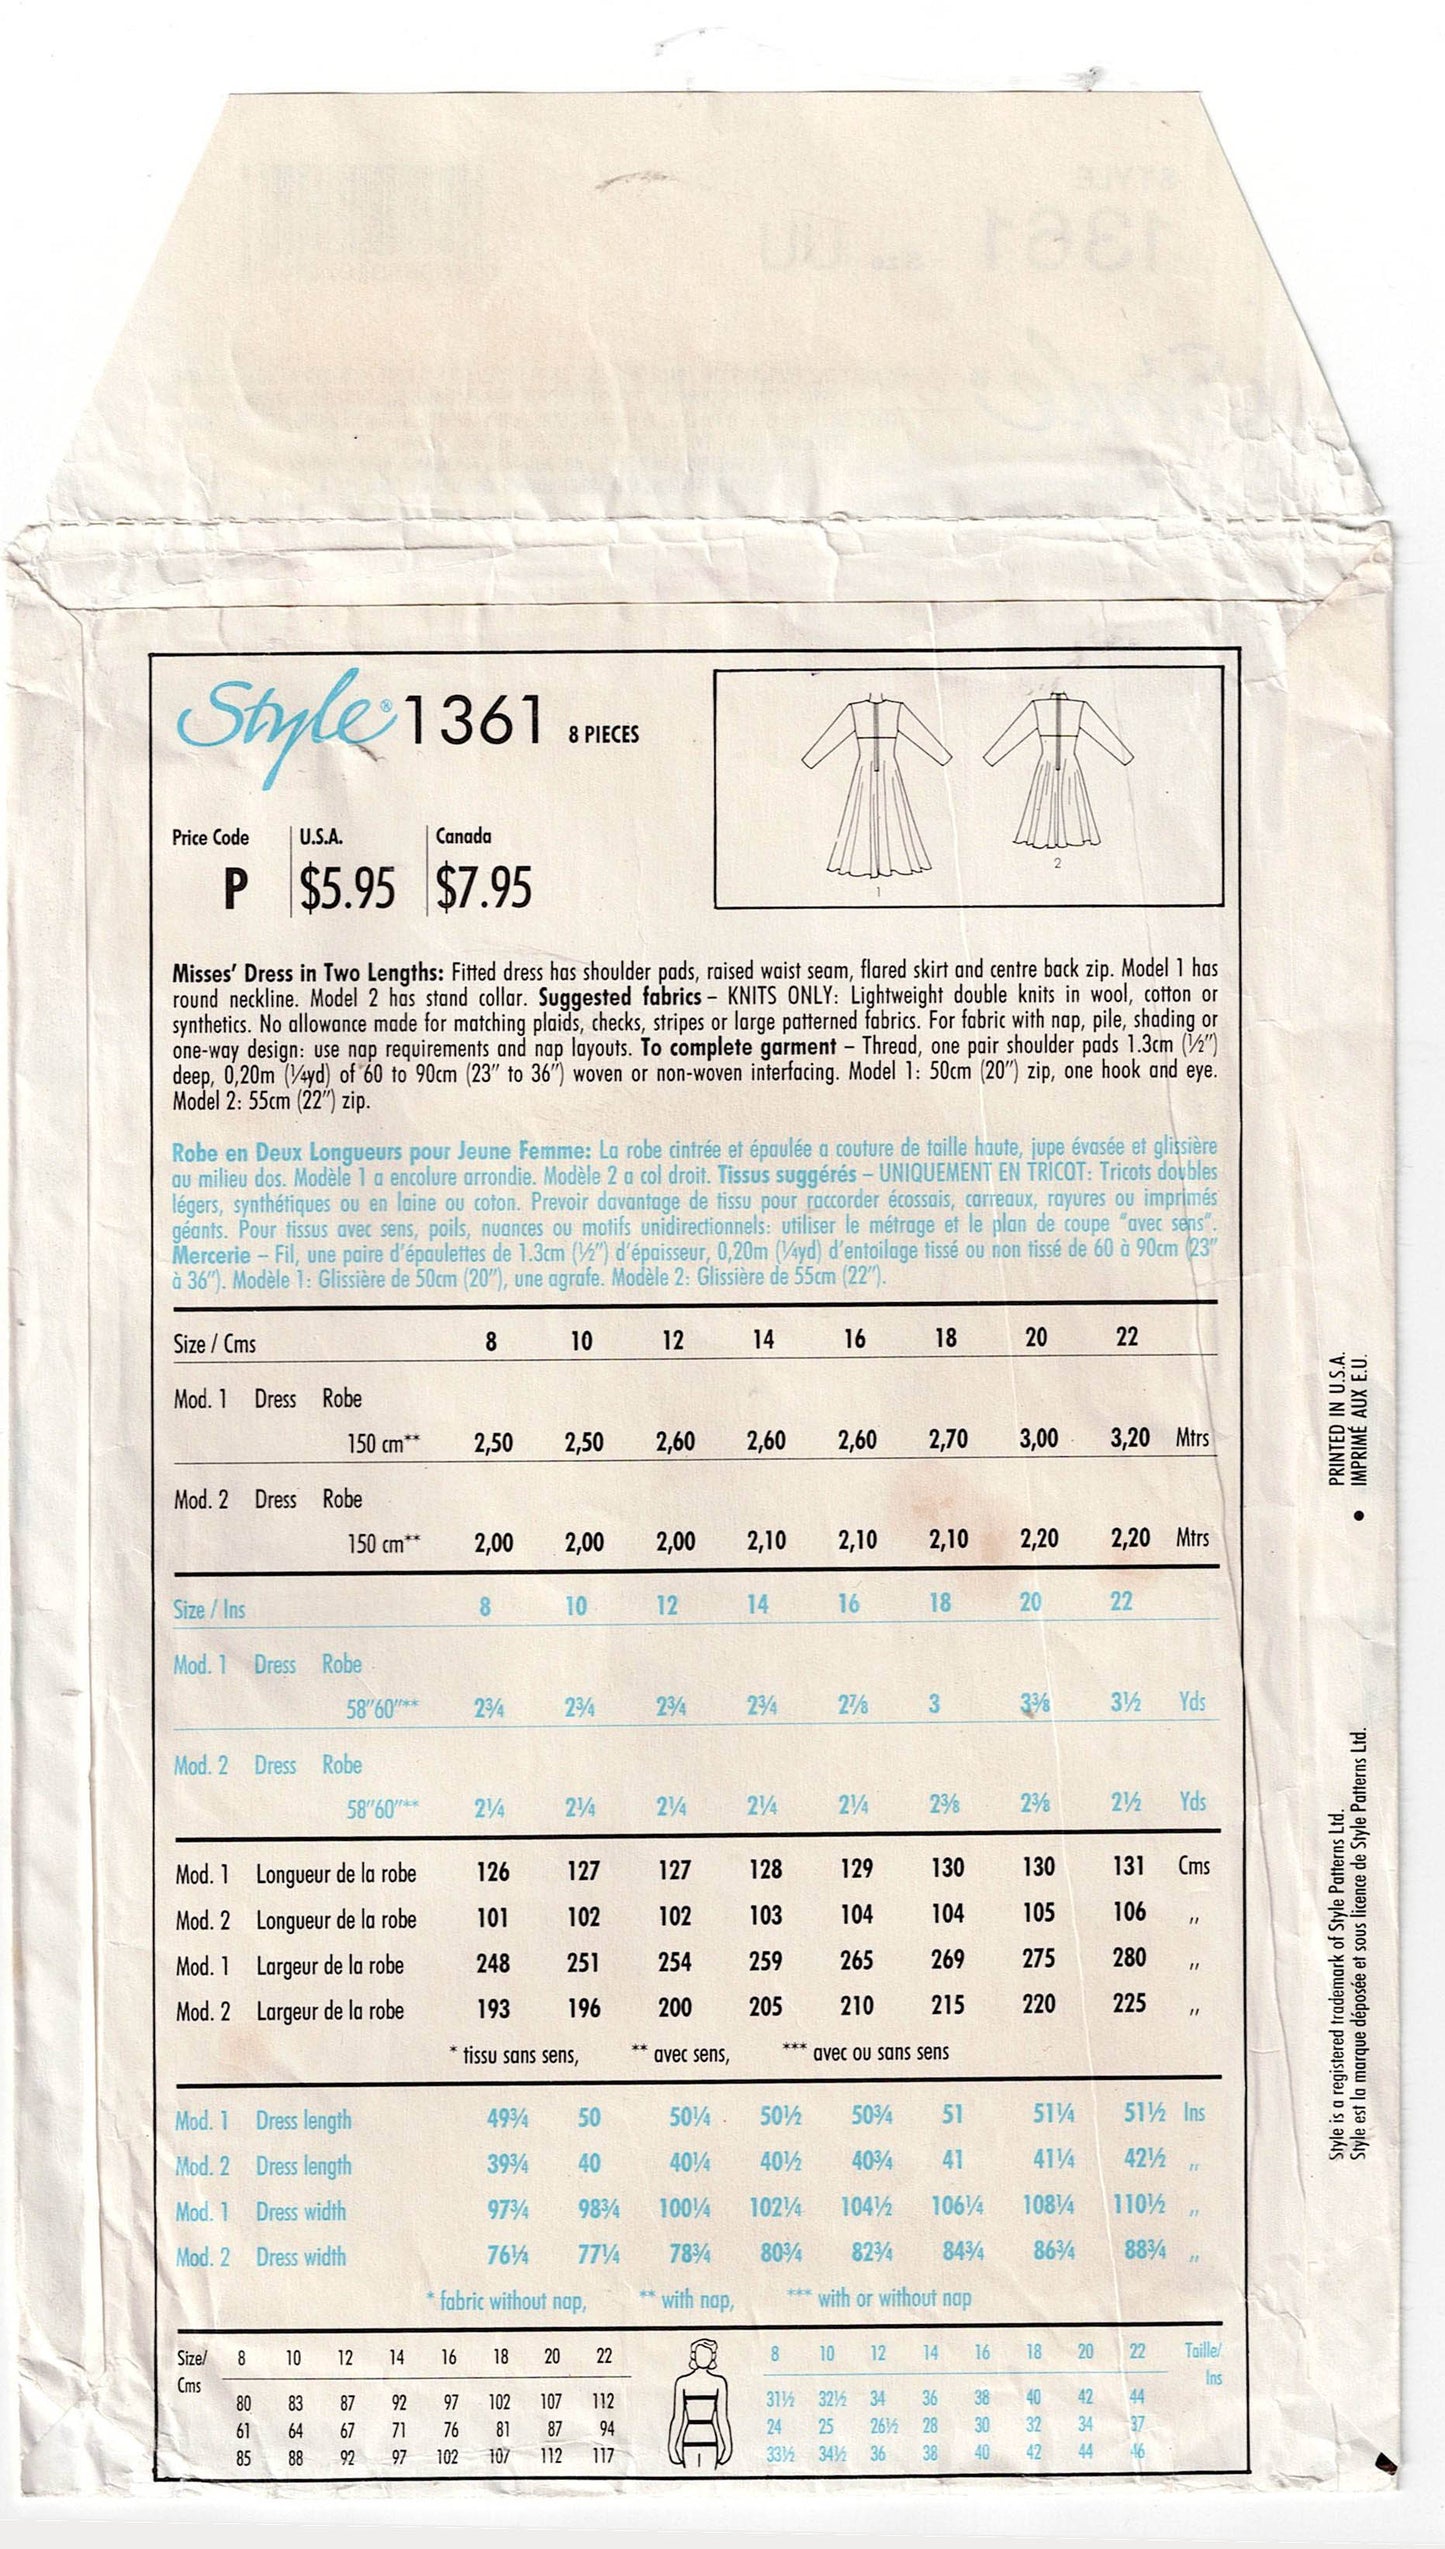 Style 1361 Womens Stretch High Waisted Dress 1980s Vintage Sewing Pattern Size 16 - 22 Bust 38 - 44 inches UNCUT Factory Folded